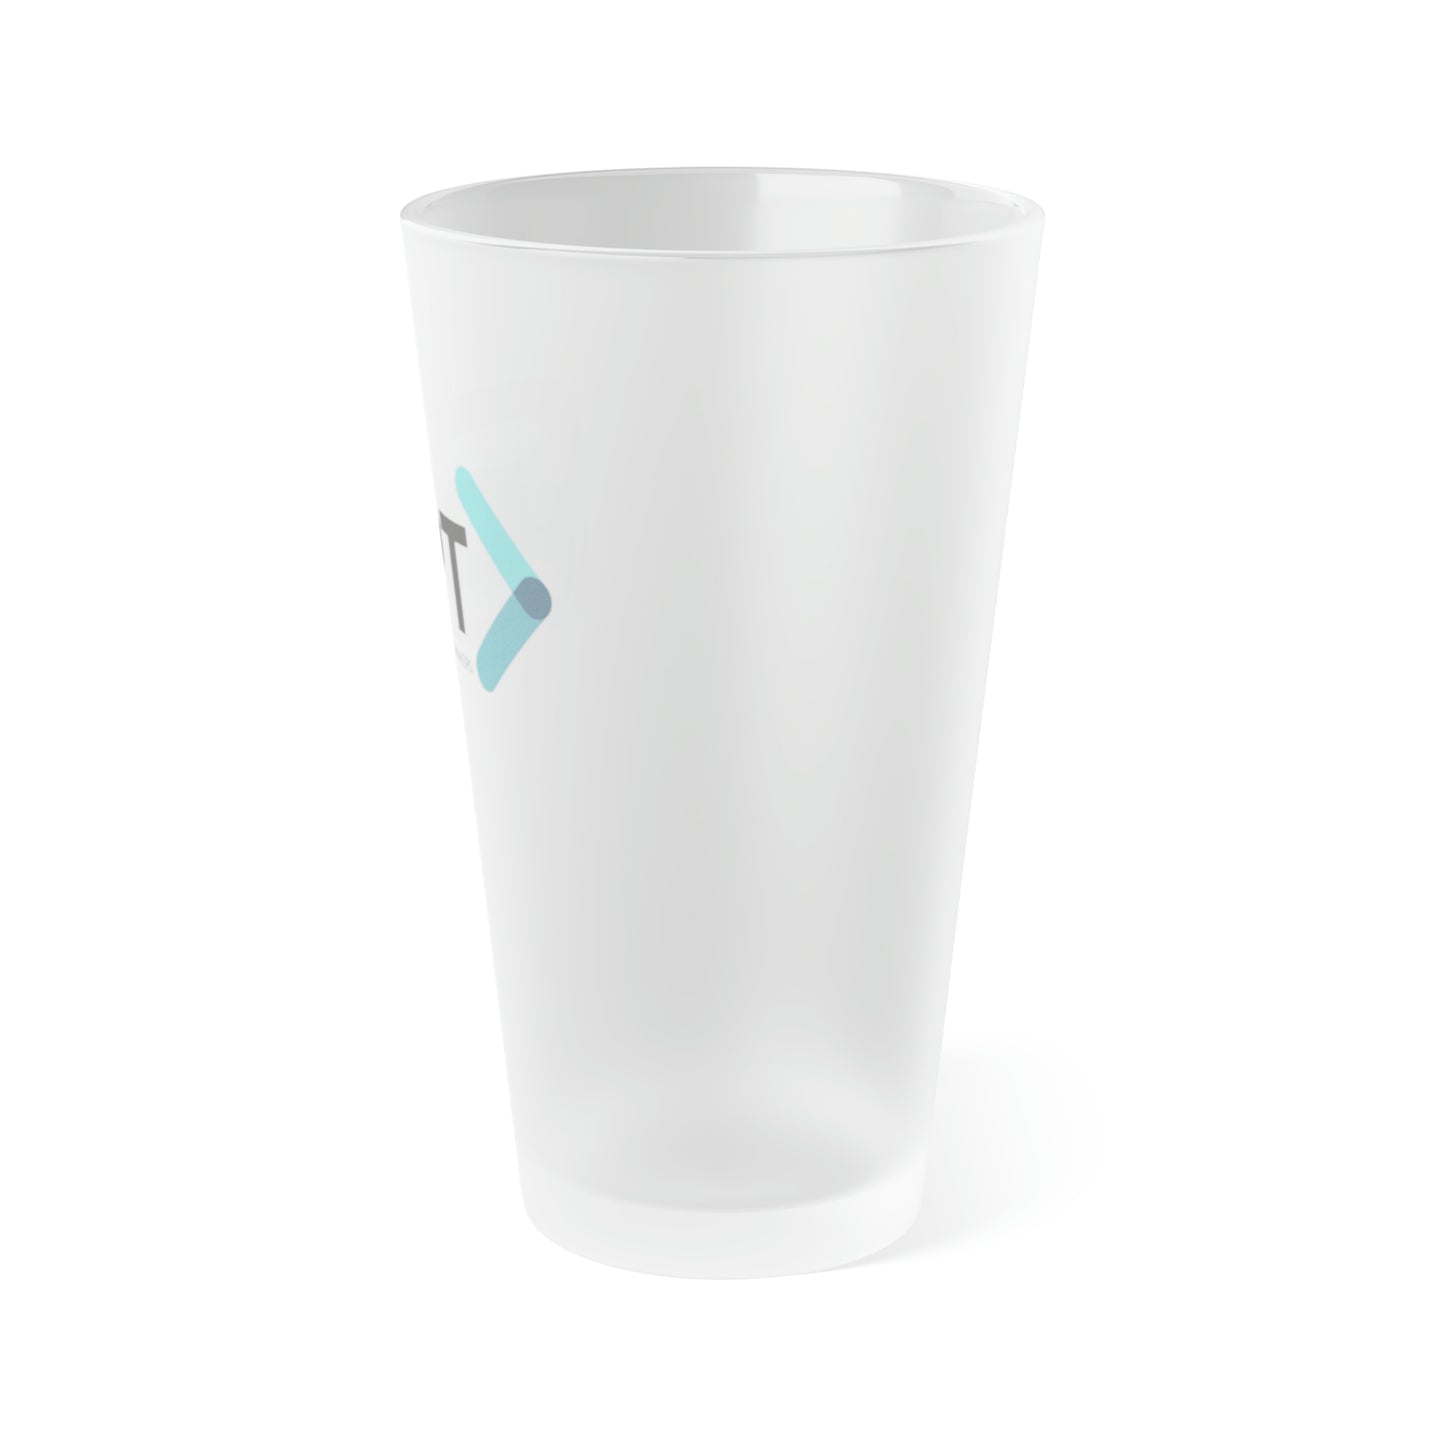 AOPT Frosted Glass, 16oz